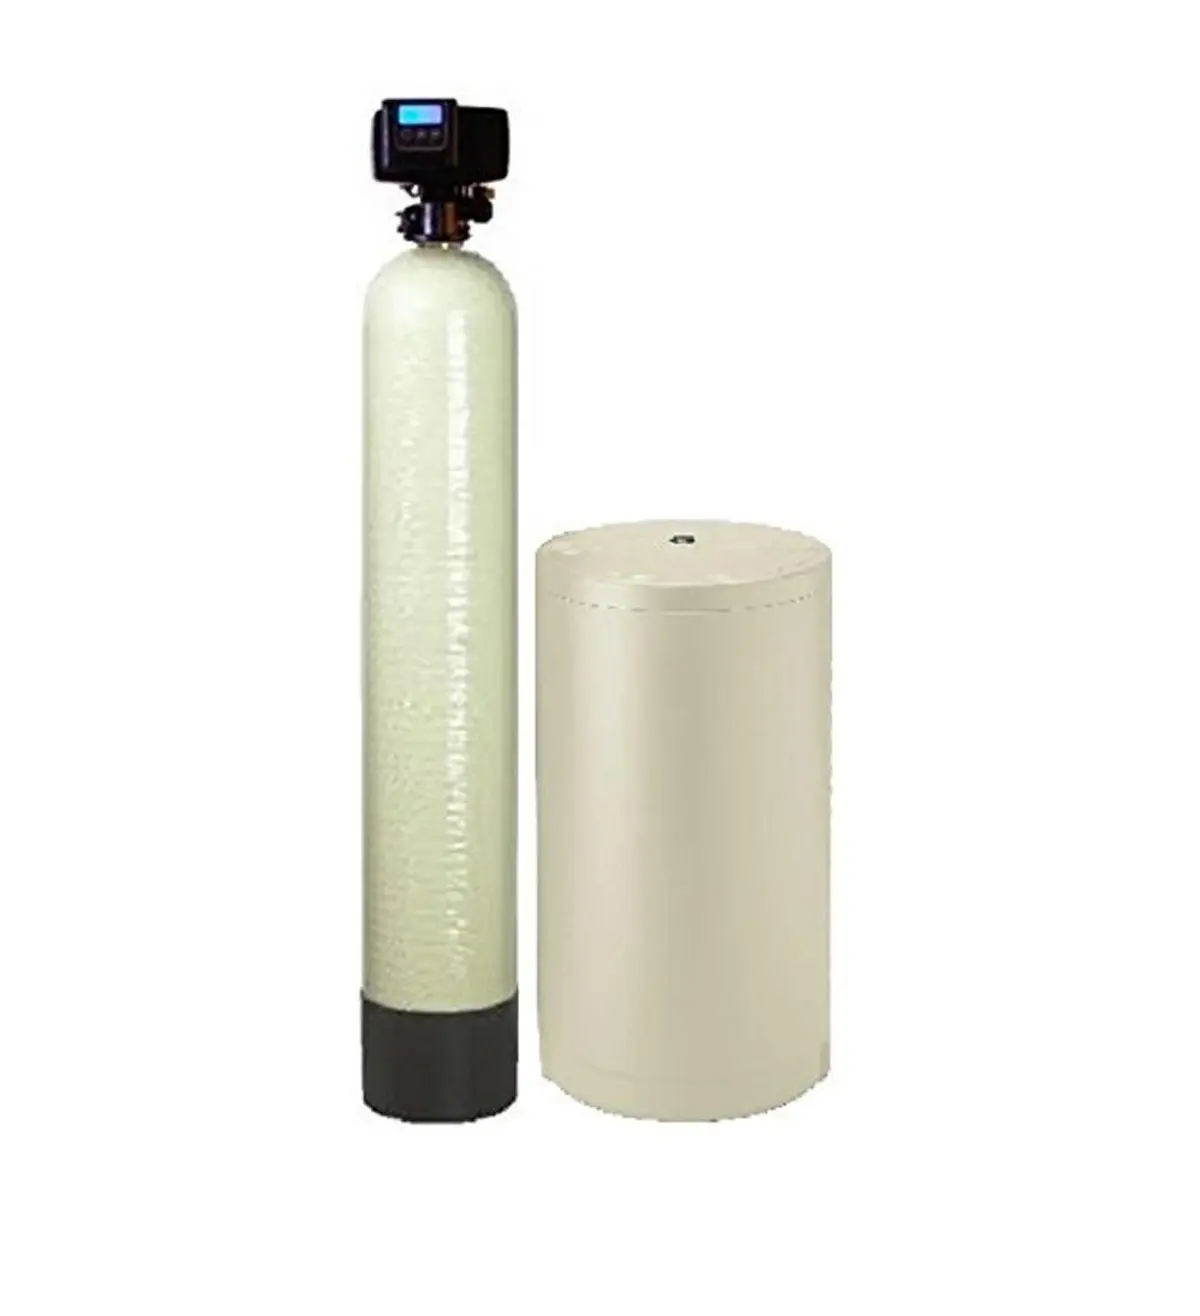 Iron Pro 2 Combination water softener Review